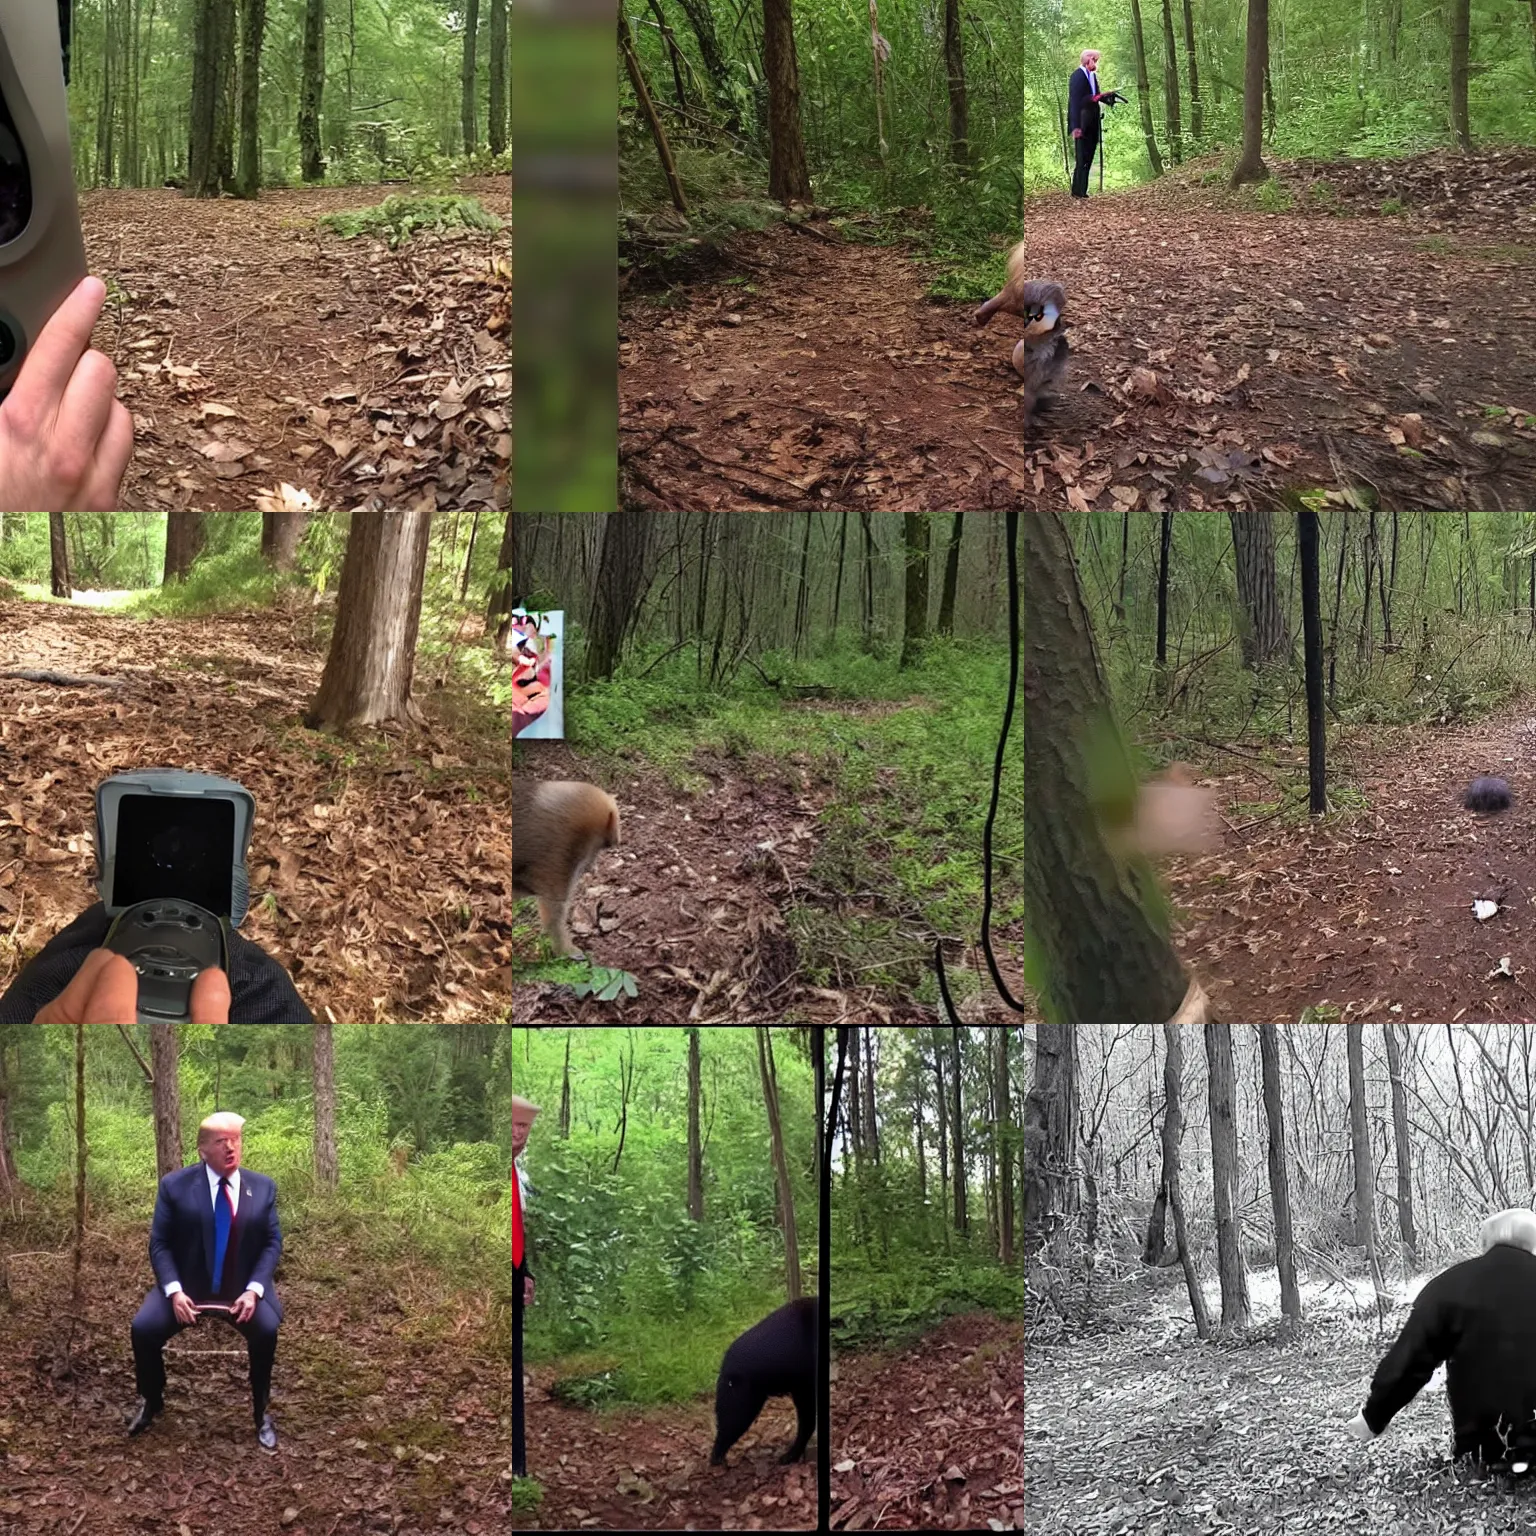 Prompt: Trail cam footage catching Donald Trump pooping in the forest